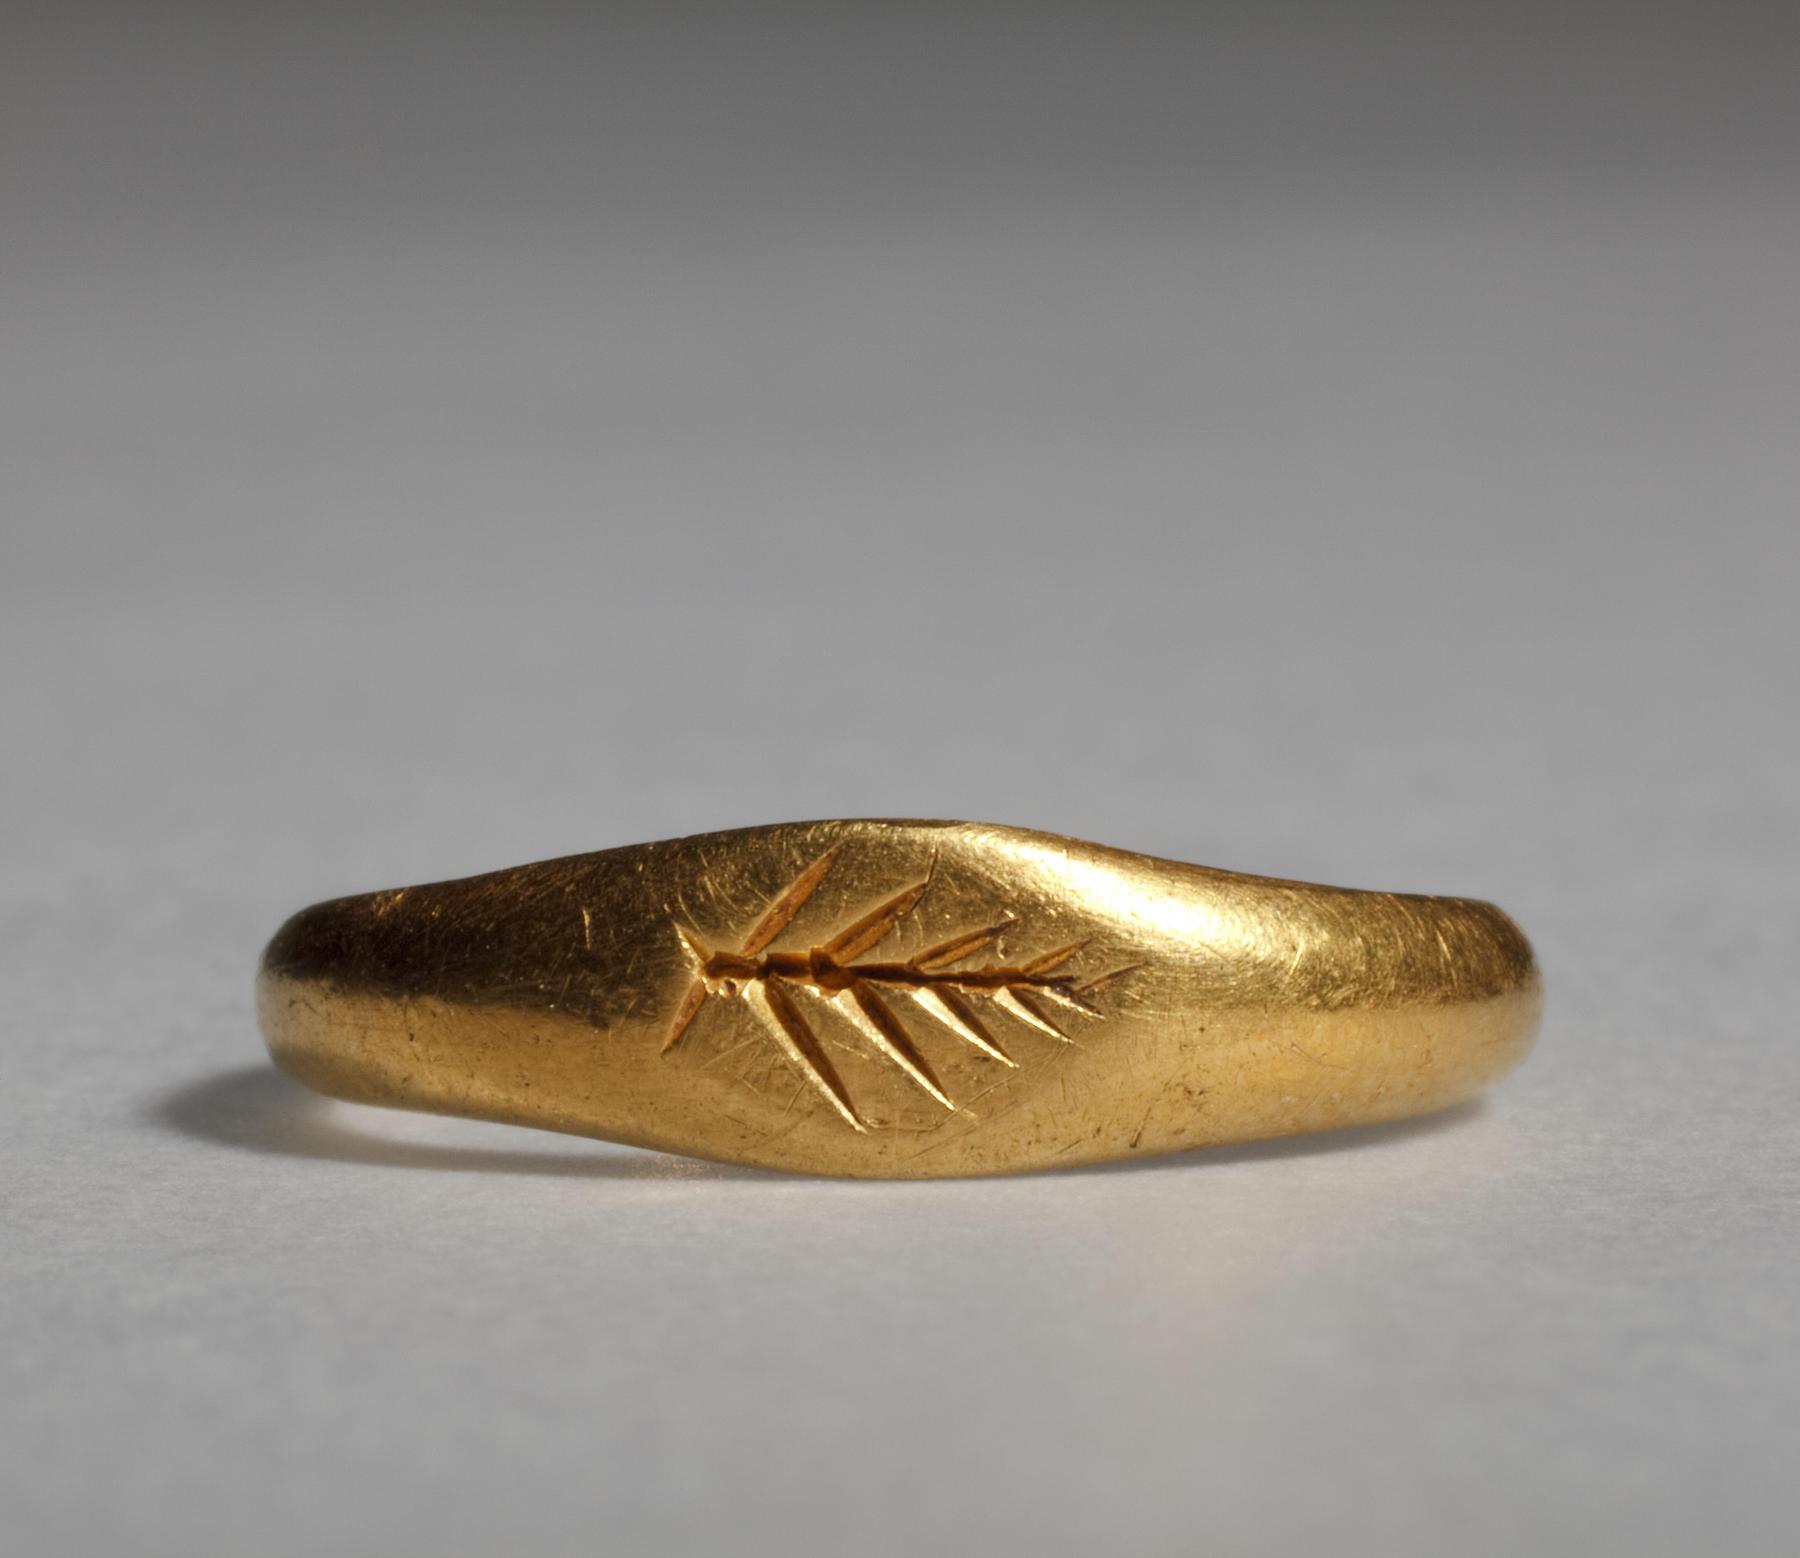 Finger ring with a branch, H1812